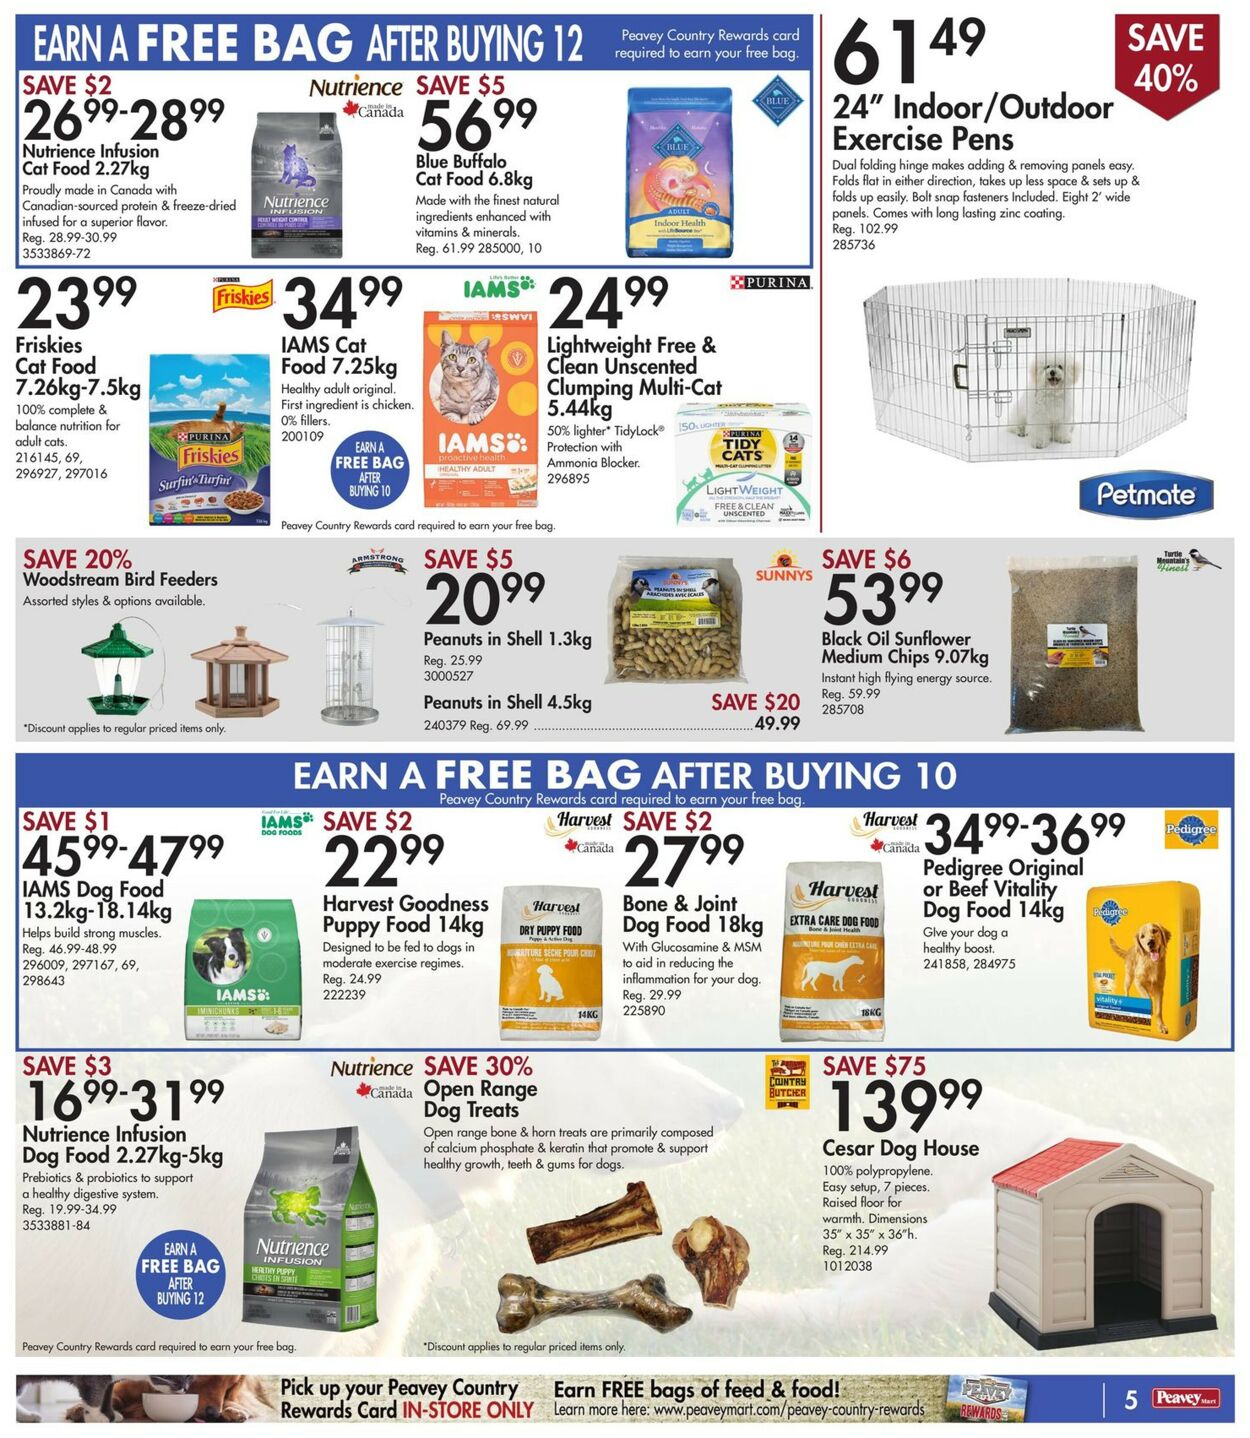 Peavey Mart Flyer from 09/16/2022